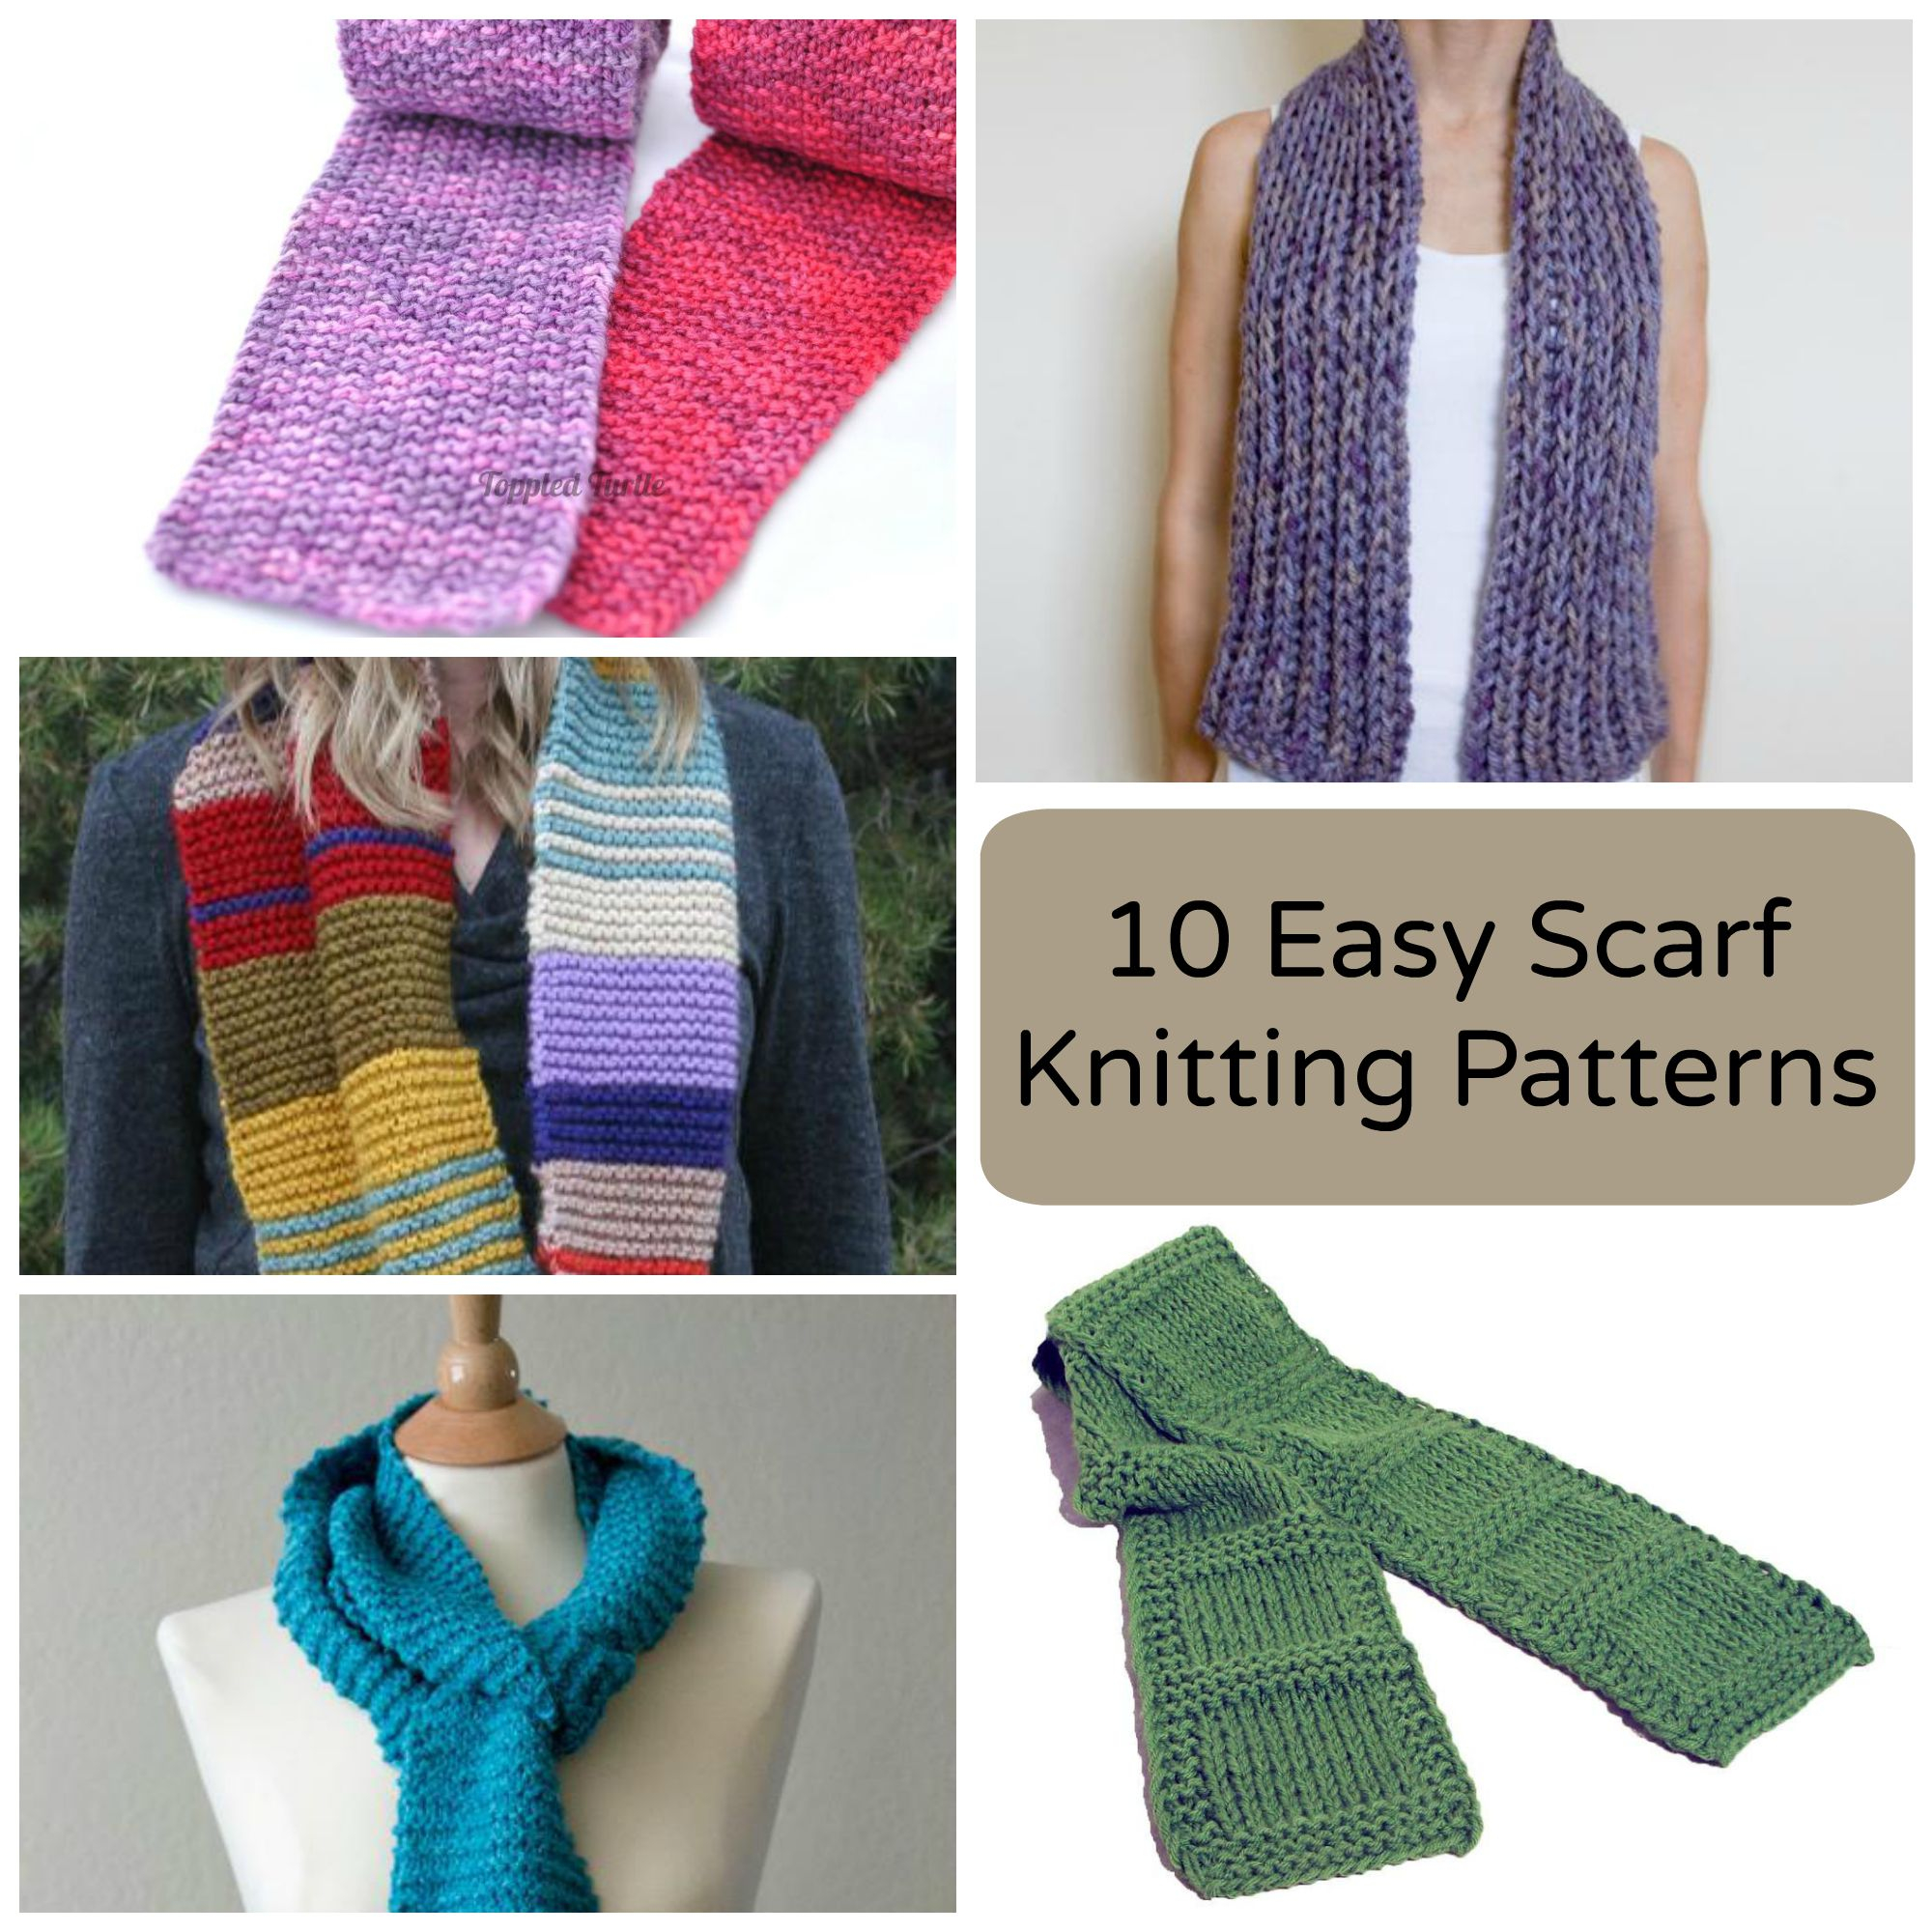 Basic Knitting Scarf Patterns Beginner Knitted Scarf Patterns To Try Out Crochet And Knitting